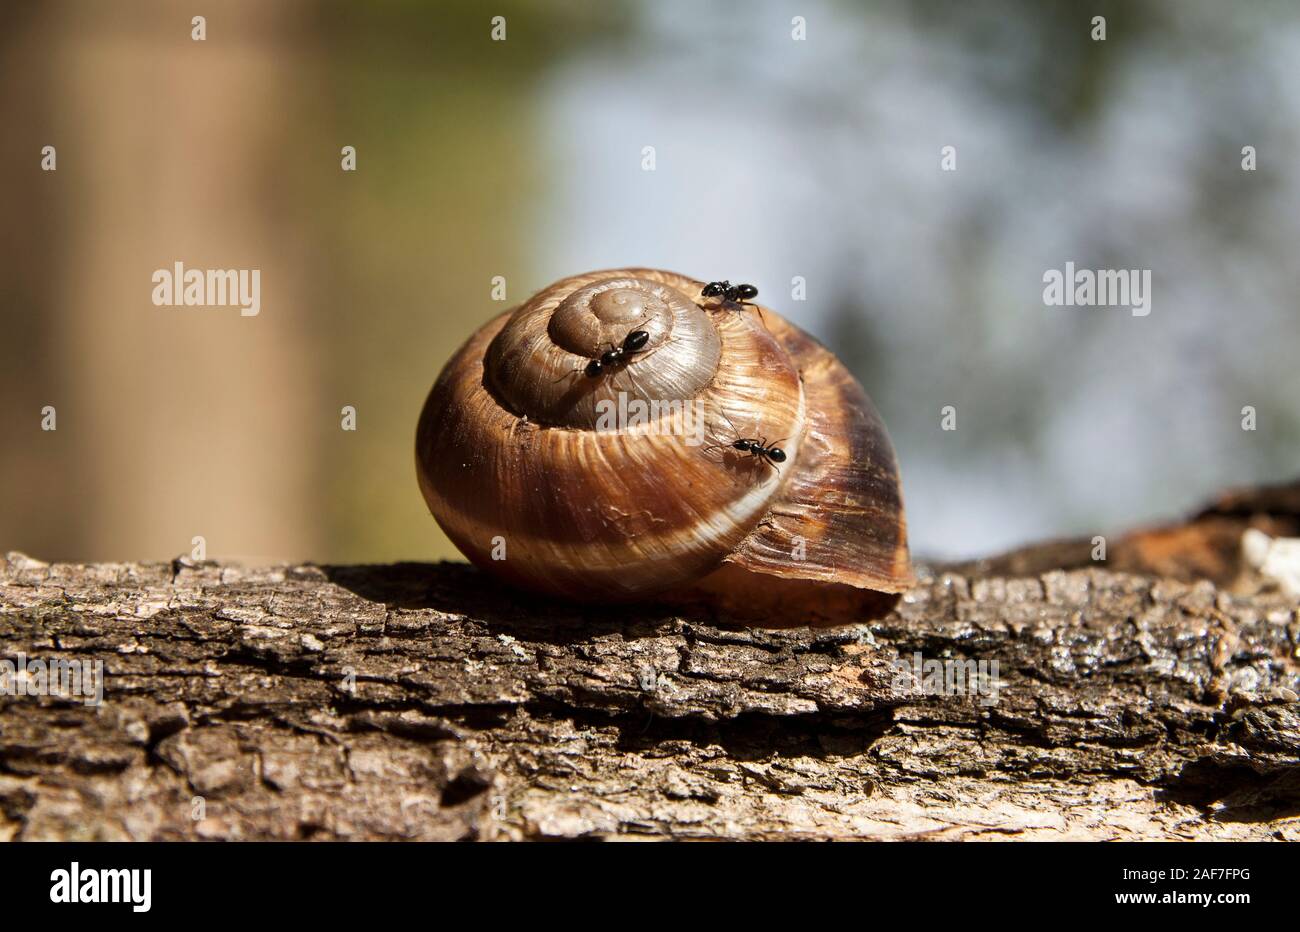 Snail shell attacked by ants in their natural environment, close up. Stock Photo